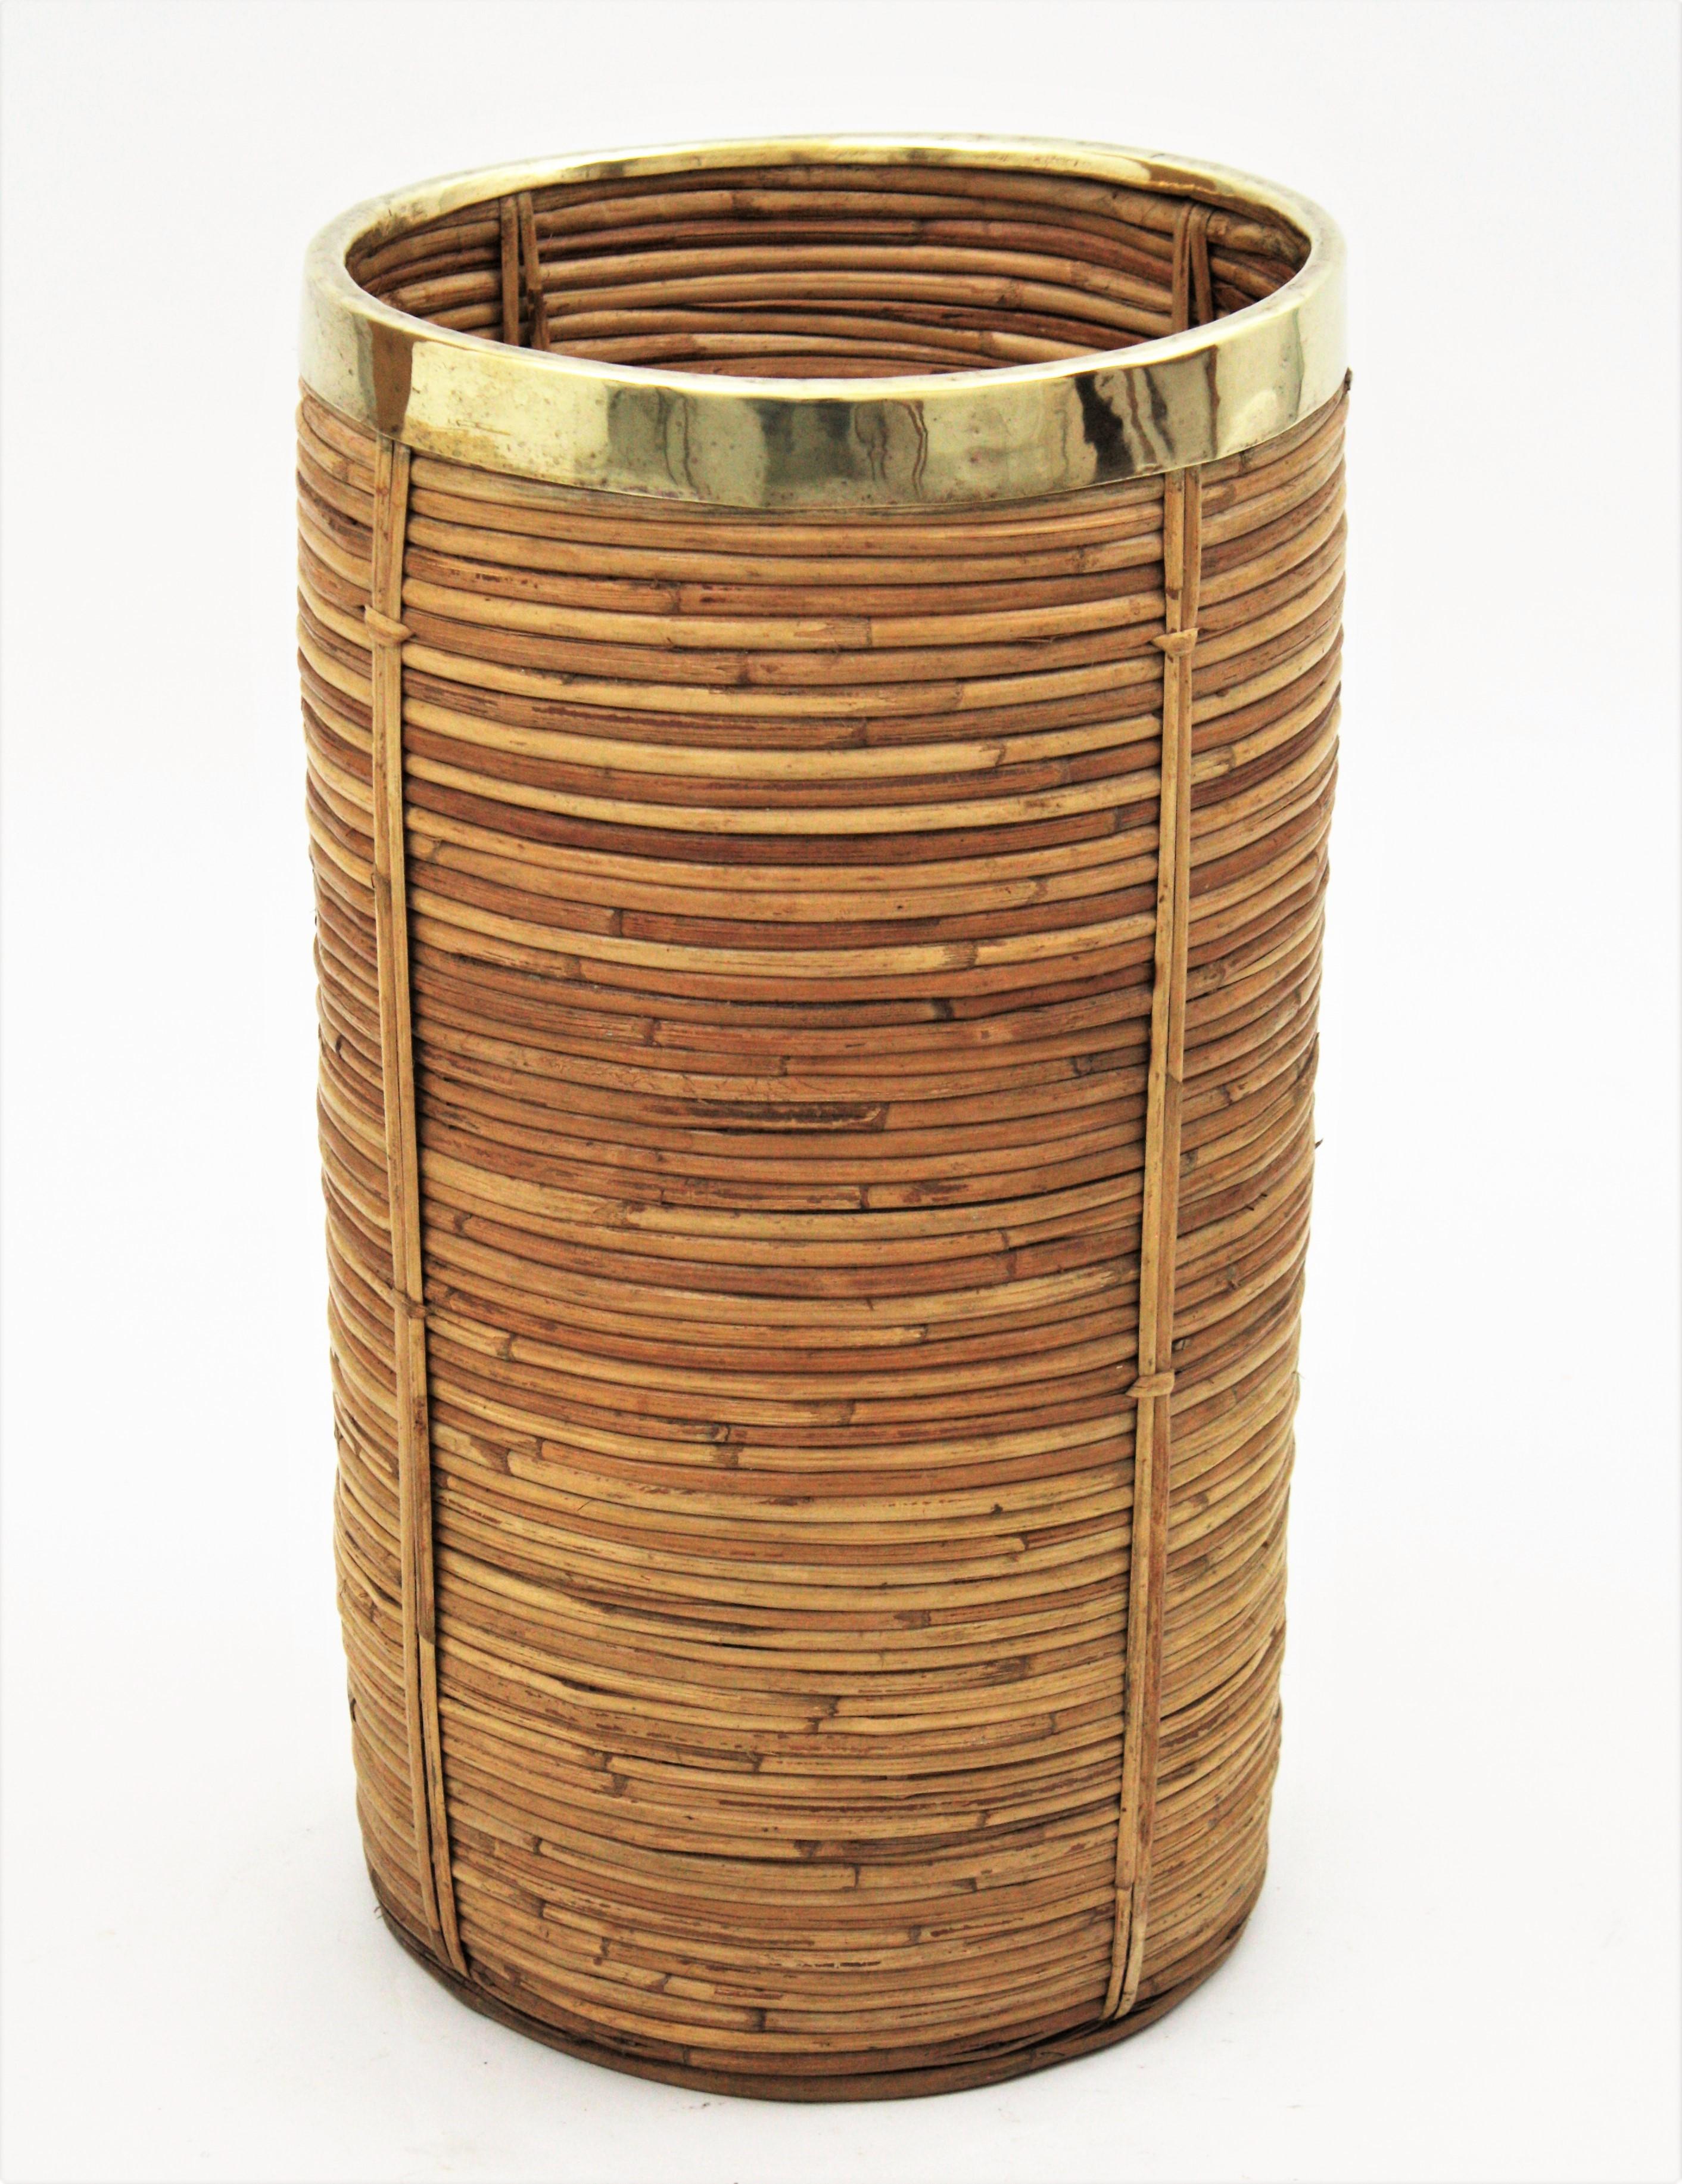 Beautiful Mid-Century Modern decorative brass and bamboo / rattan umbrella stand, tall planter or paper bin. Handcrafted in Italy, 1970s.
Round shape with gilded brass rim.
In the style of Gabriella Crespi.
This piece is in very good vintage